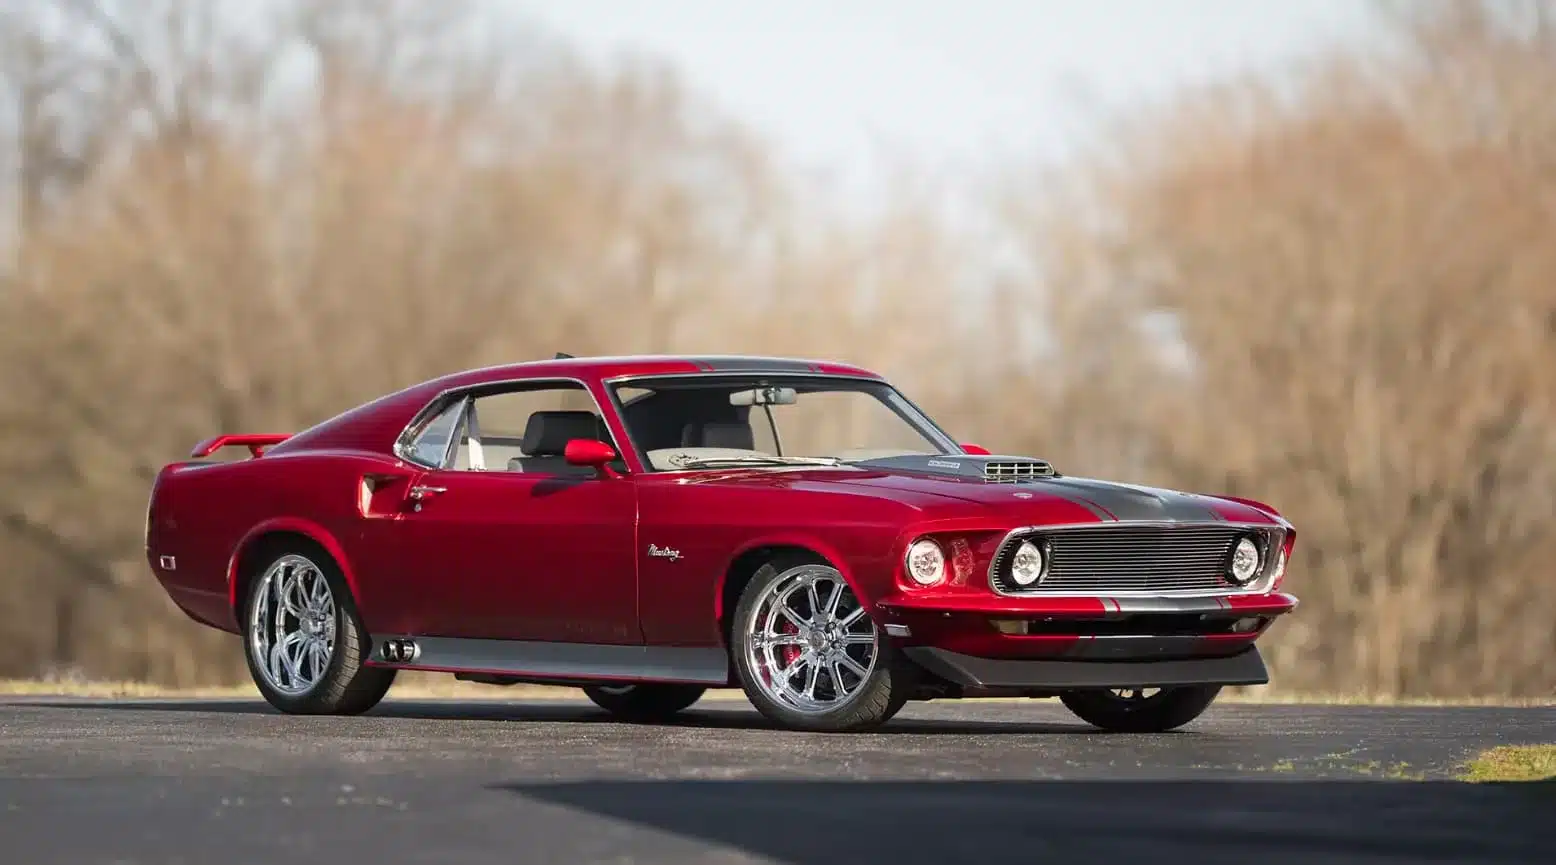 The Ultimate Resto Mod: 1969 Ford Mustang with Coyote Power